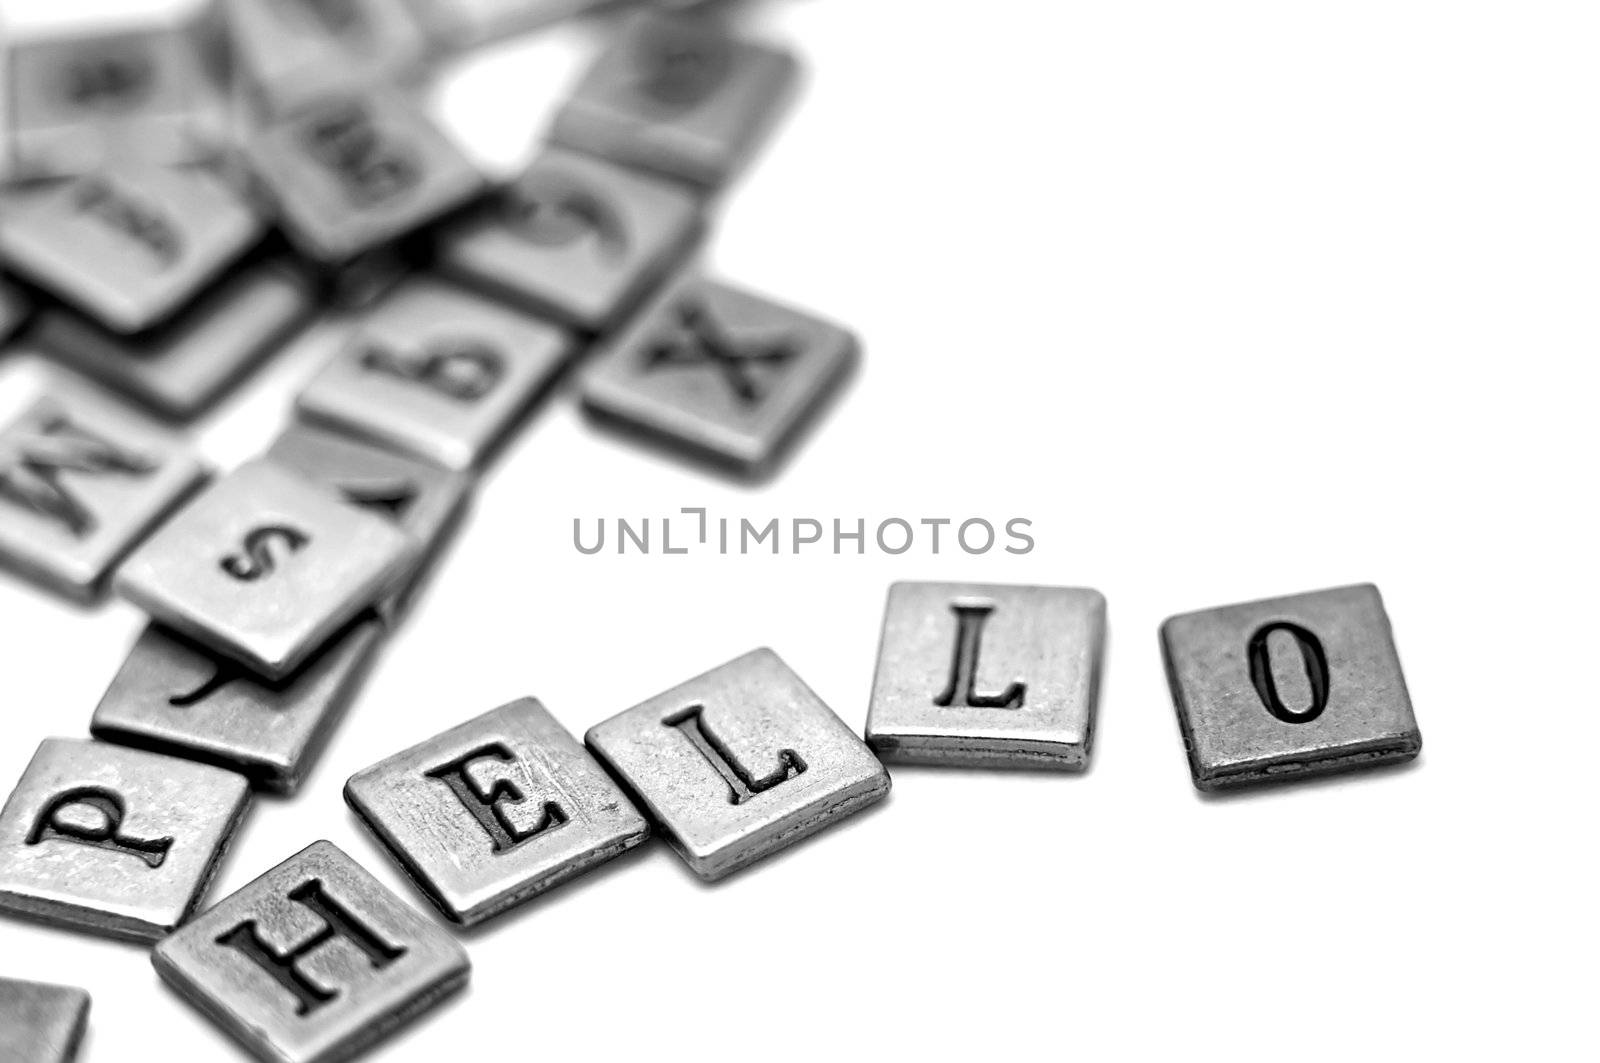 Metal scrapbooking letters spelling Hello by Talanis